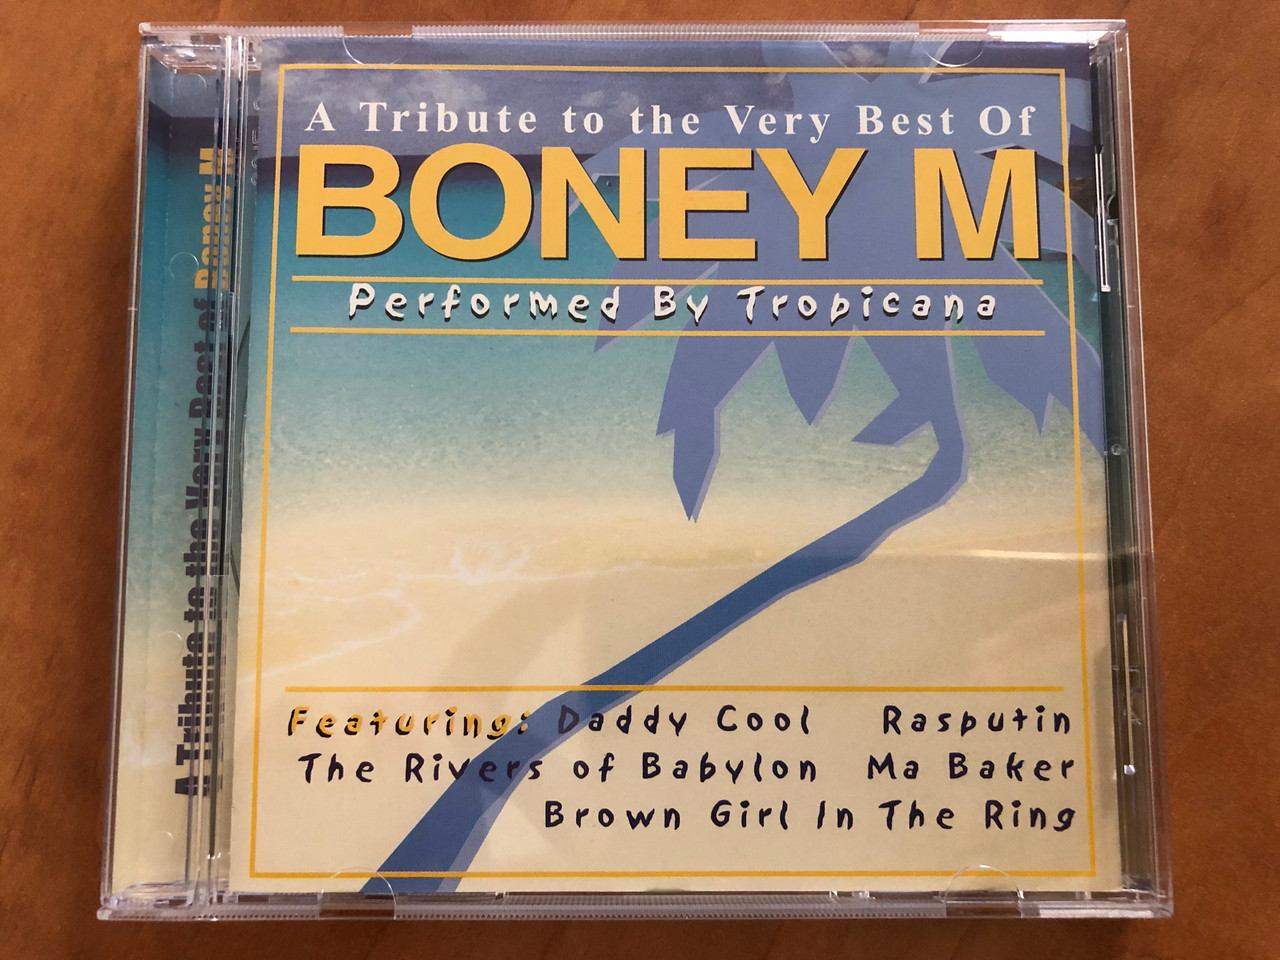 https://cdn10.bigcommerce.com/s-62bdpkt7pb/products/30770/images/181681/A_Tribute_To_The_Very_Best_Of_Boney_M_-_Performed_by_Tropicana_Featuring_Daddy_Cool_Rasputin_The_Rivers_Of_Babylon_Ma_Baker_Brown_Girl_In_The_Ring_SP_Series_Audio_CD_2001_SP083-2_1__96309.1623827692.1280.1280.JPG?c=2&_ga=2.210445589.1829284140.1623917769-62128686.1623917769